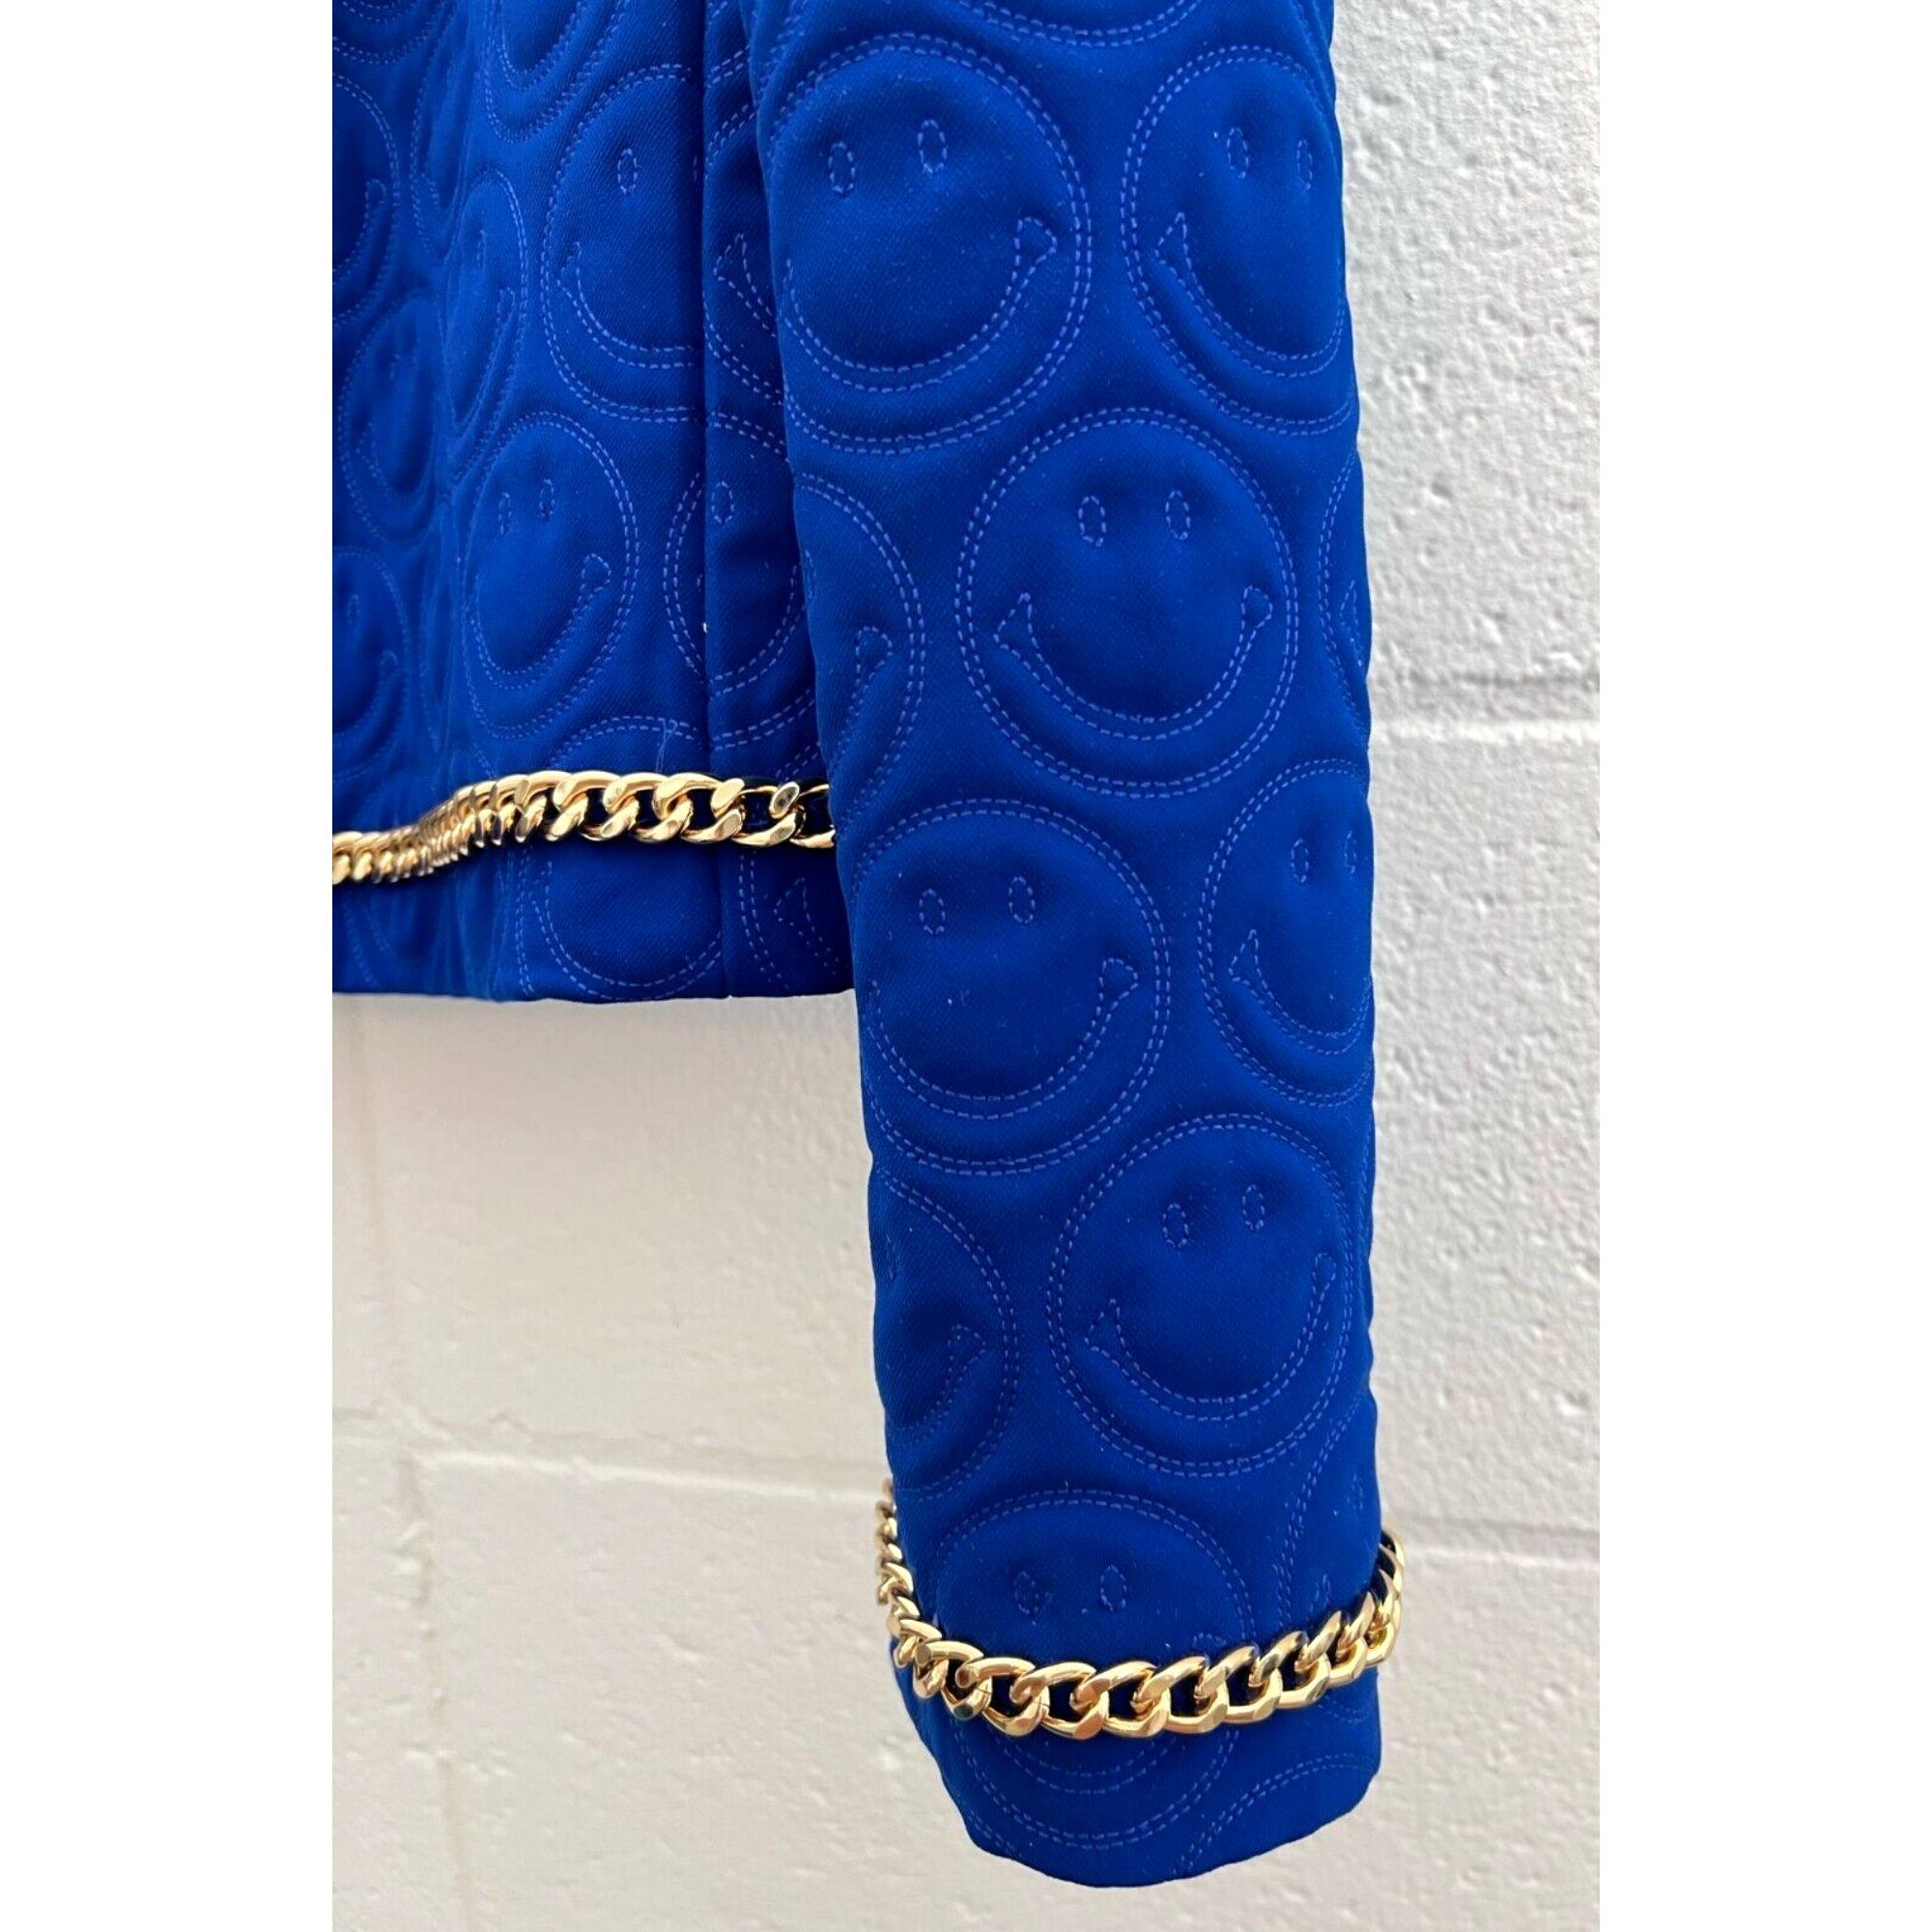 SS21 Moschino Couture BlueBlazer Smiley Face by Jeremy Scott, Size US 10 In New Condition For Sale In Palm Springs, CA